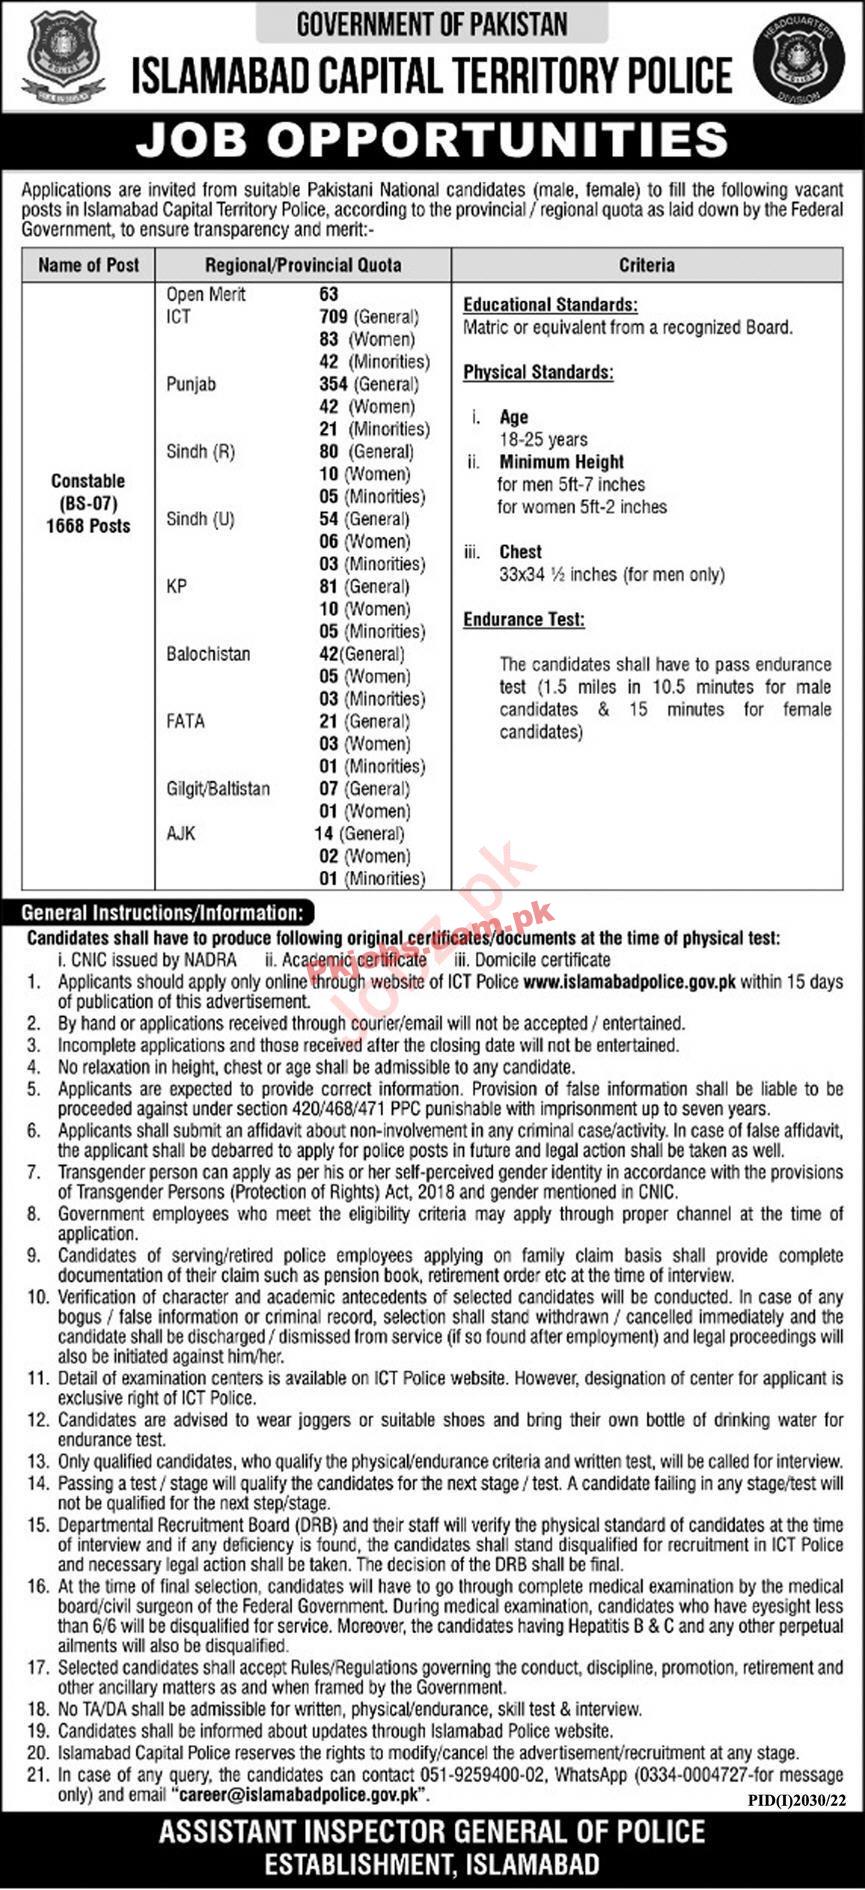 ICTP Jobs 2022 | Islamabad Capital Territory Police ICTP Headquarters Announced Latest Recruitment Jobs 2022